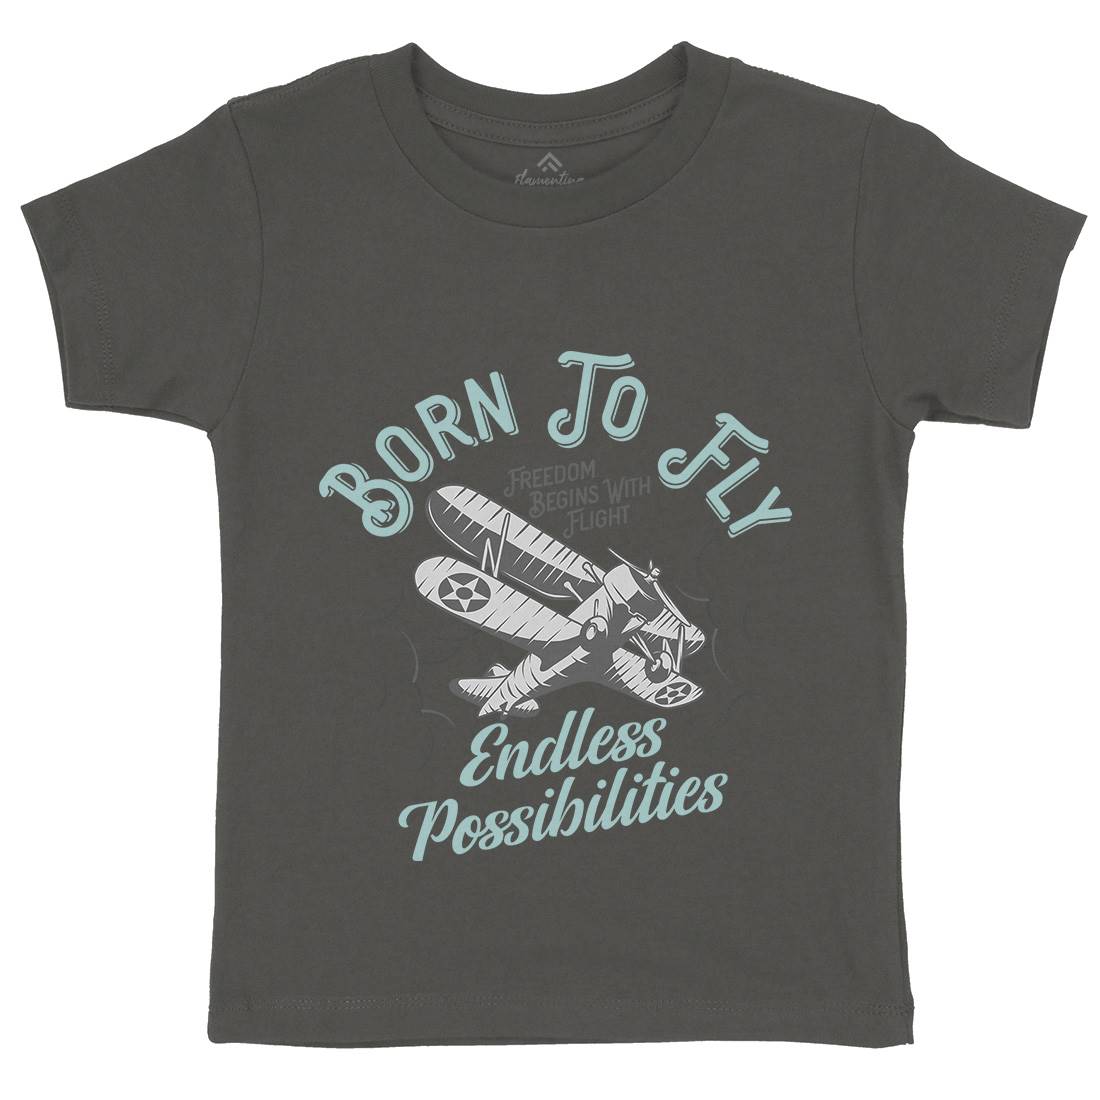 Born To Fly Kids Crew Neck T-Shirt Vehicles D913